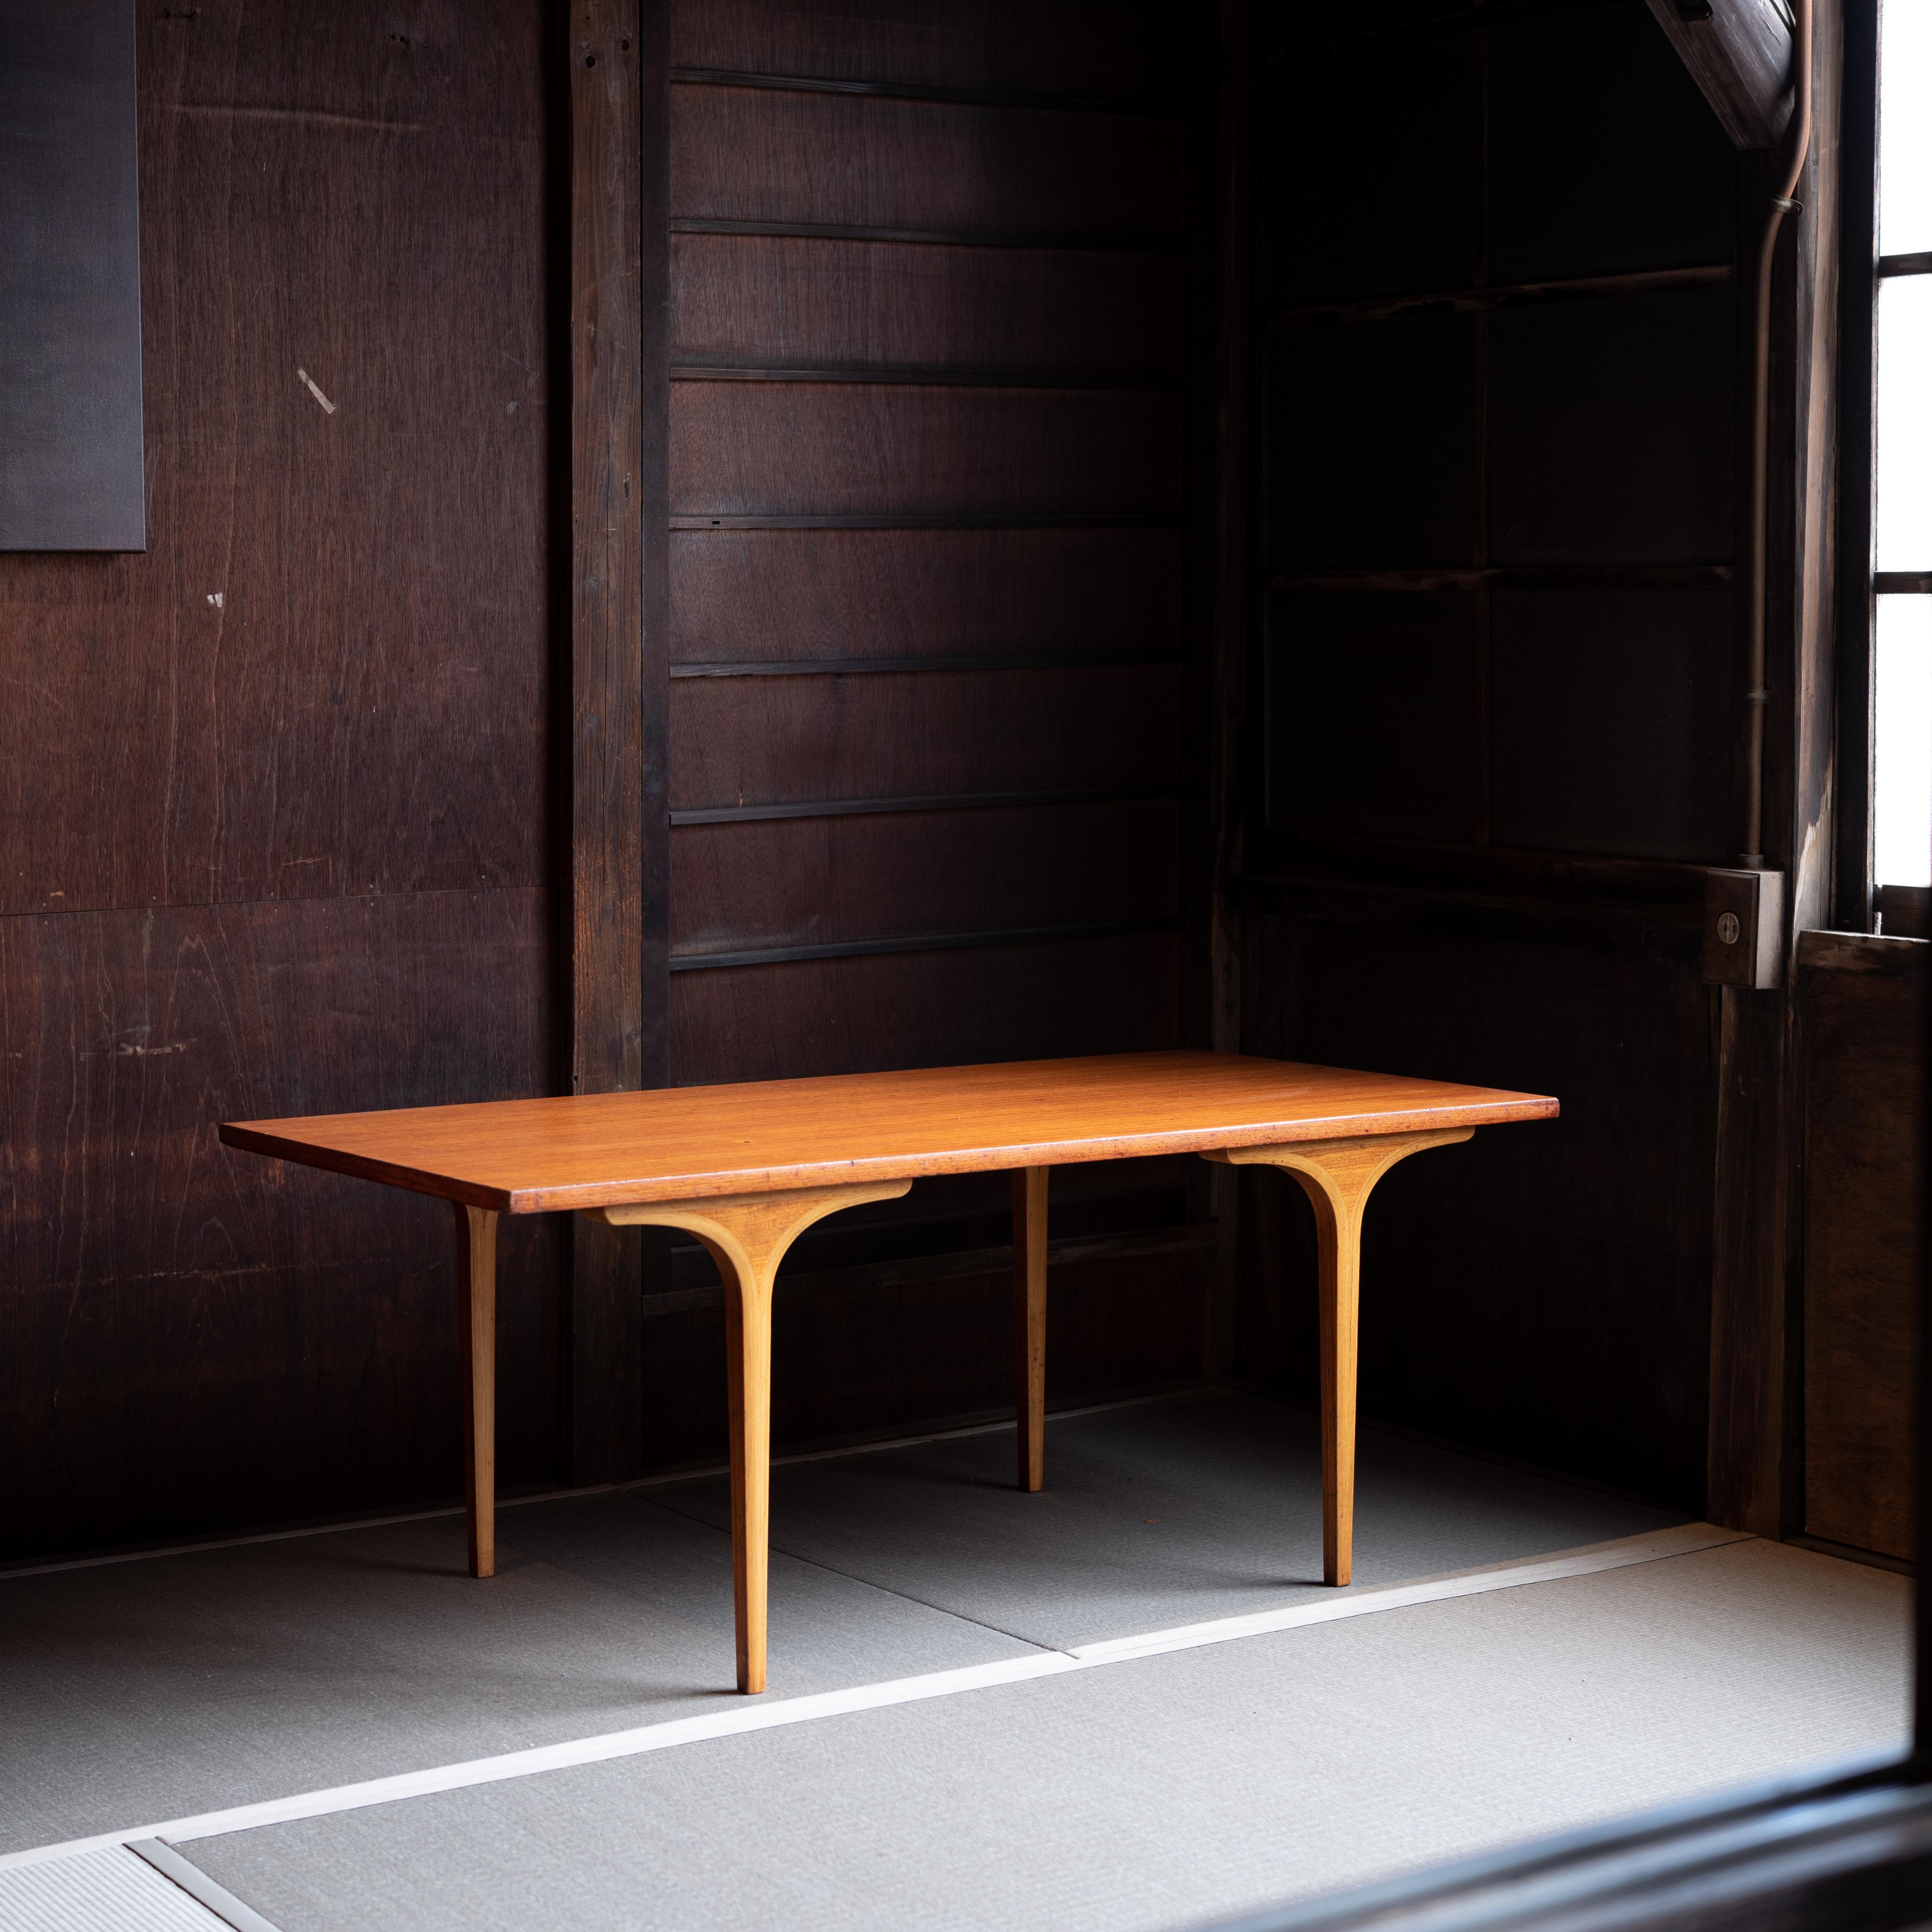 Table designed by Junzo Sakakura Architecture Institute Daisaku Cho and manufactured by Tendo Mokko.
Teak and plywood.
1970s.
At the base of the table legs, pieces of wood is fitted into the plywood using a technique called “adding a piece” forming.